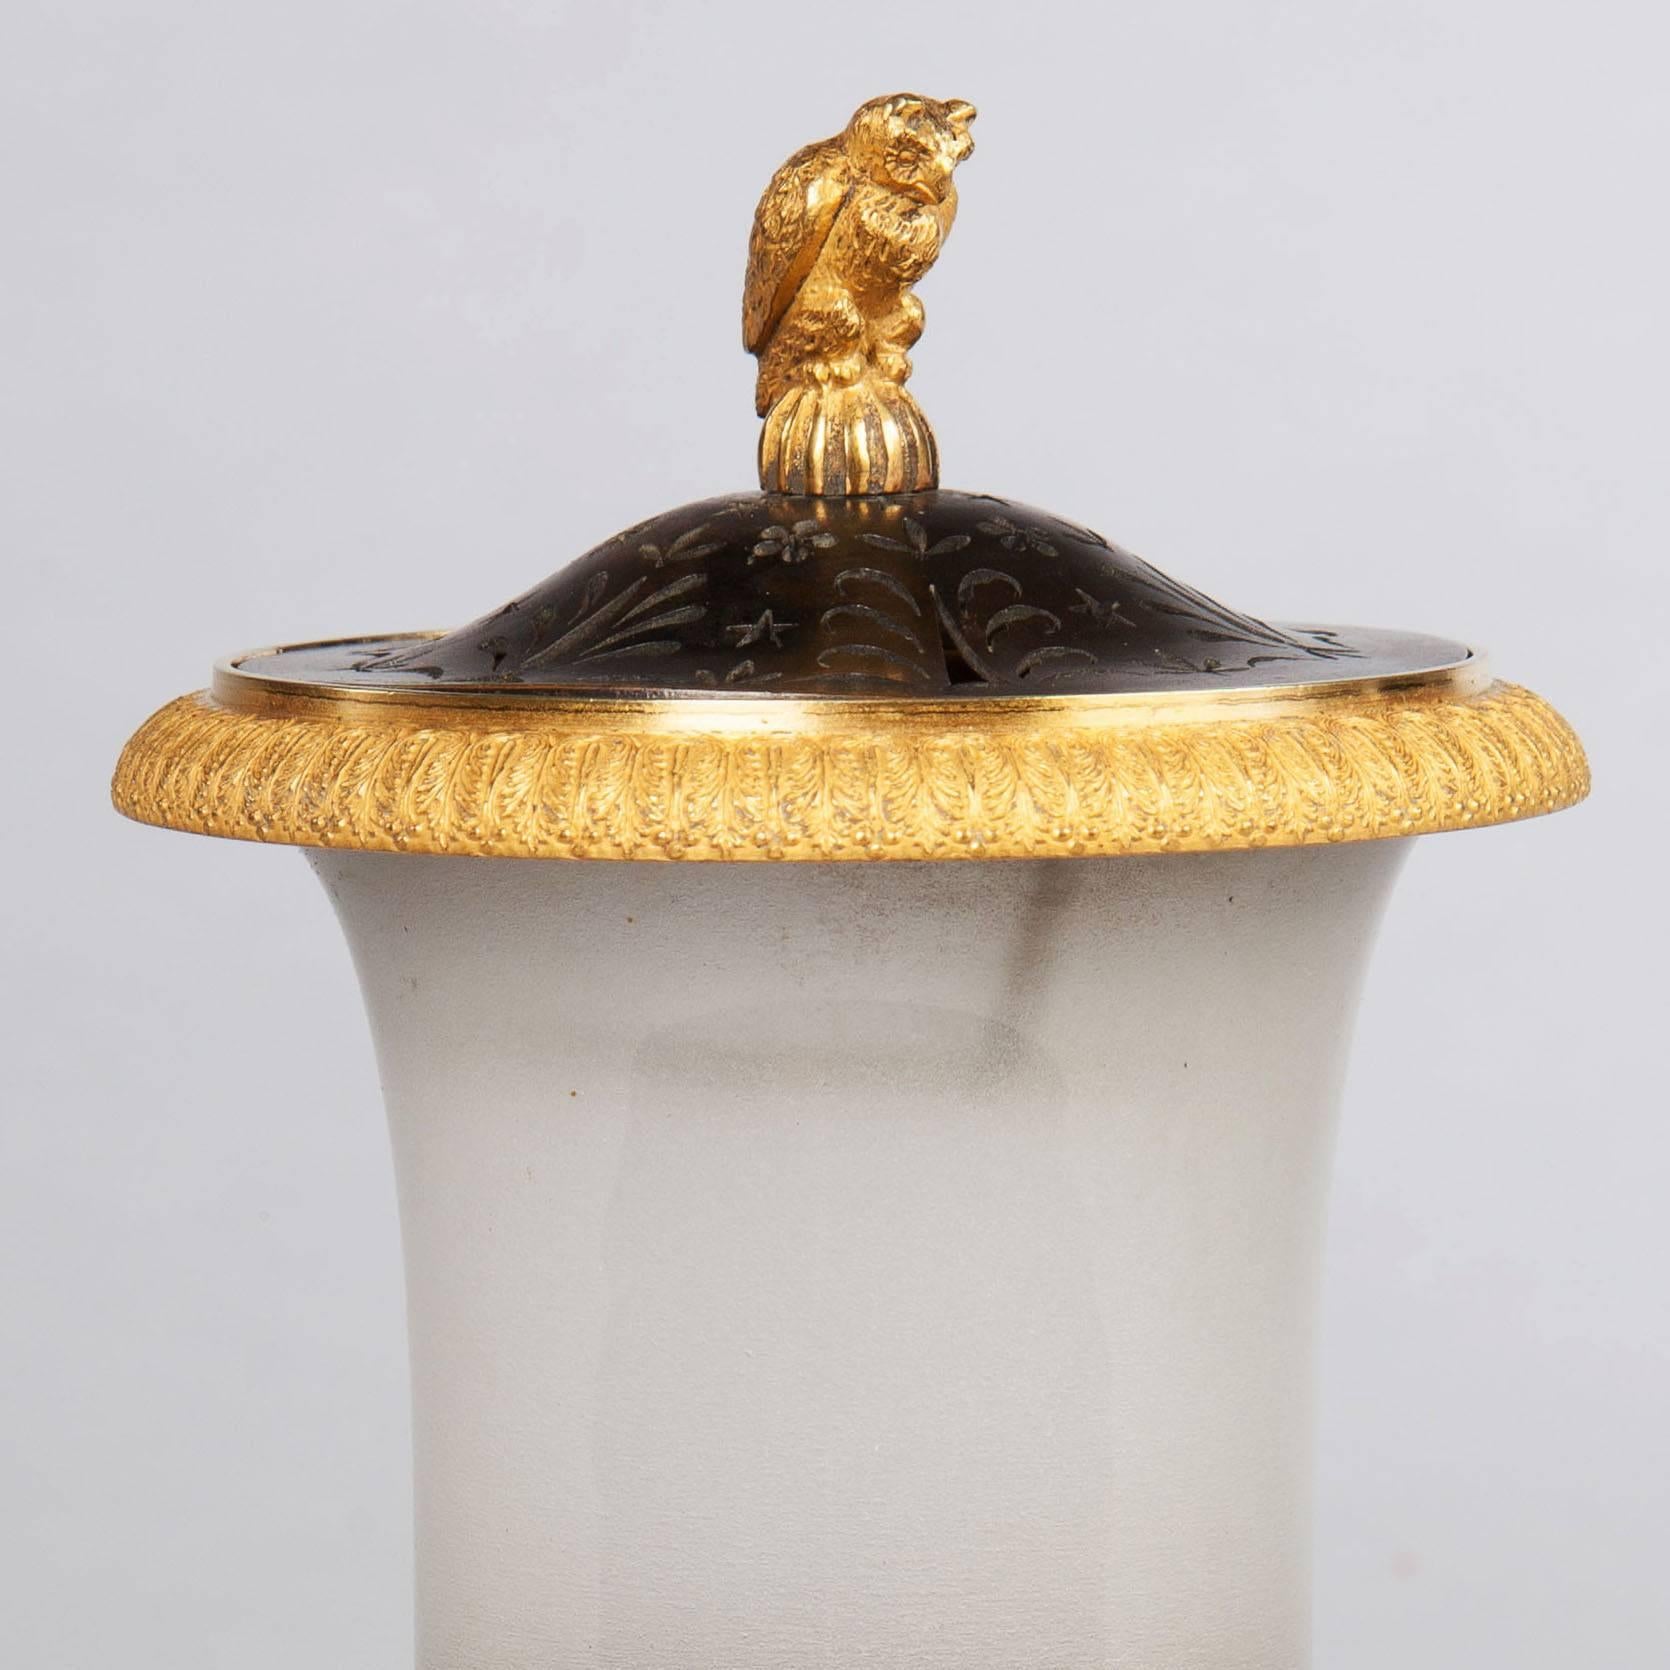 An Empire bronze and gilt opaline night light.

A rare and unusual Empire night light or incense burner. The pierced bronze lid is surmounted by a gilt bronze owl. The campana form of the body is frosted opaline and supported on a gilt and bronze